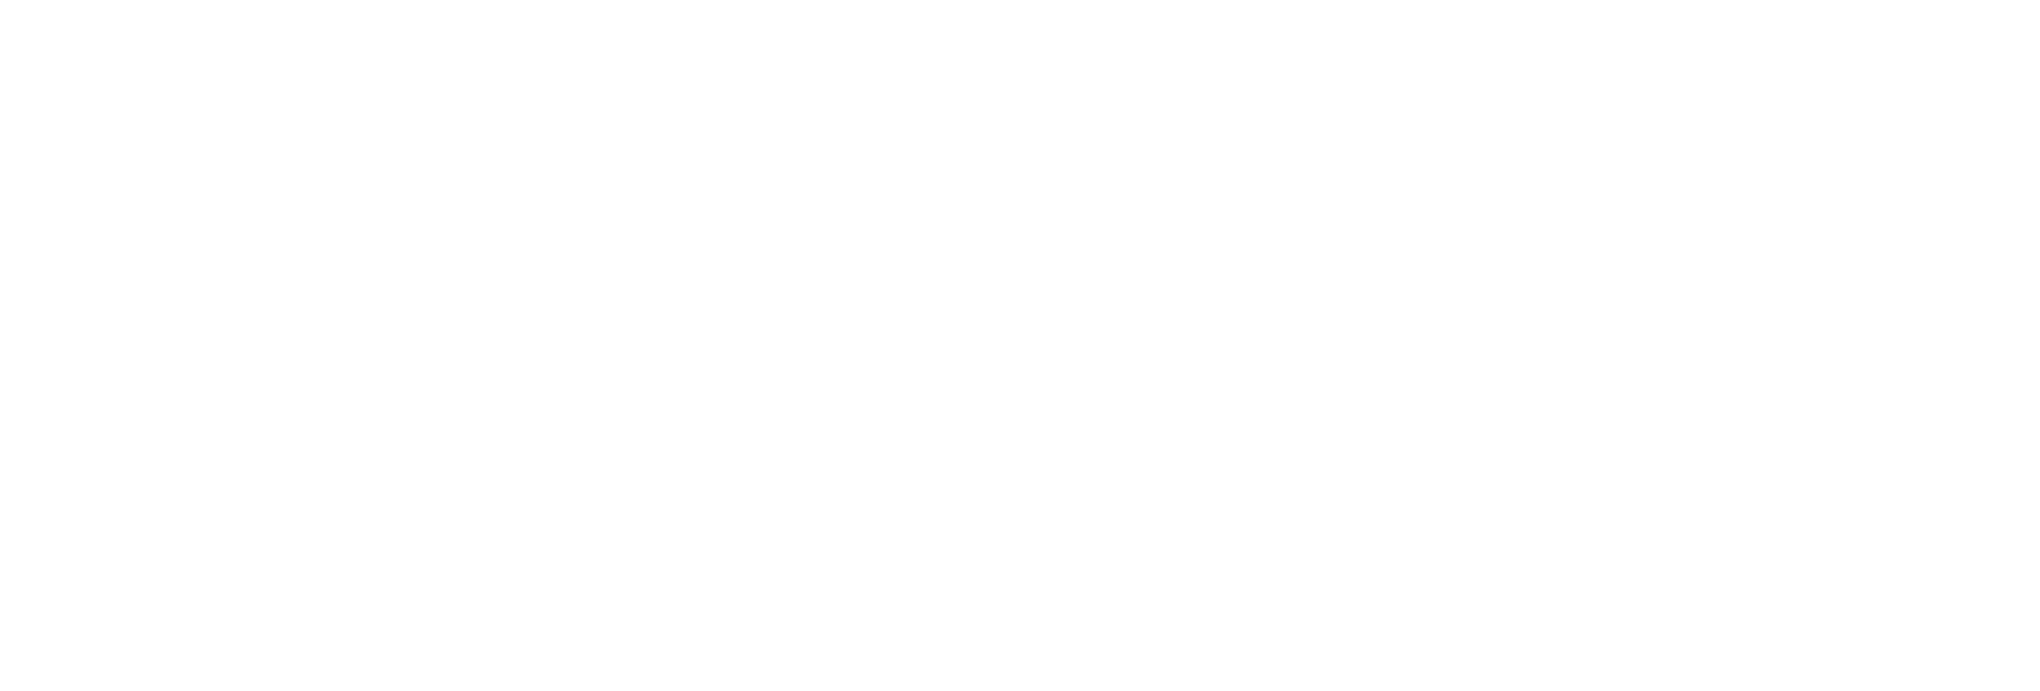 Accreditation logo for the Association to Advance Collegiate Schools of Business (AACSB) International 